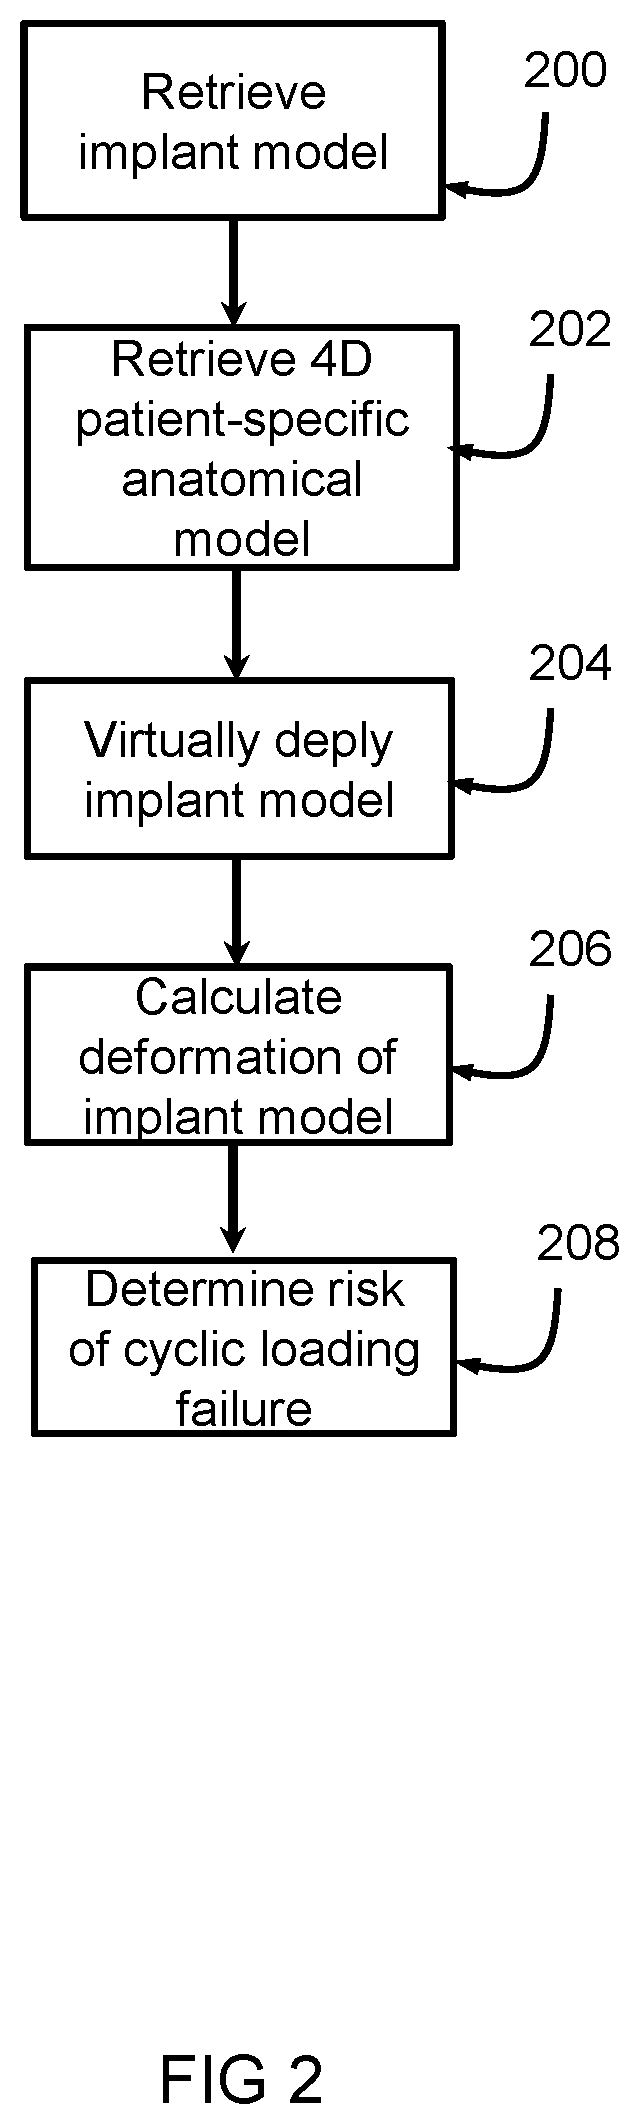 Method and system for patient-specific predicting of cyclic loading failure of a cardiac implant